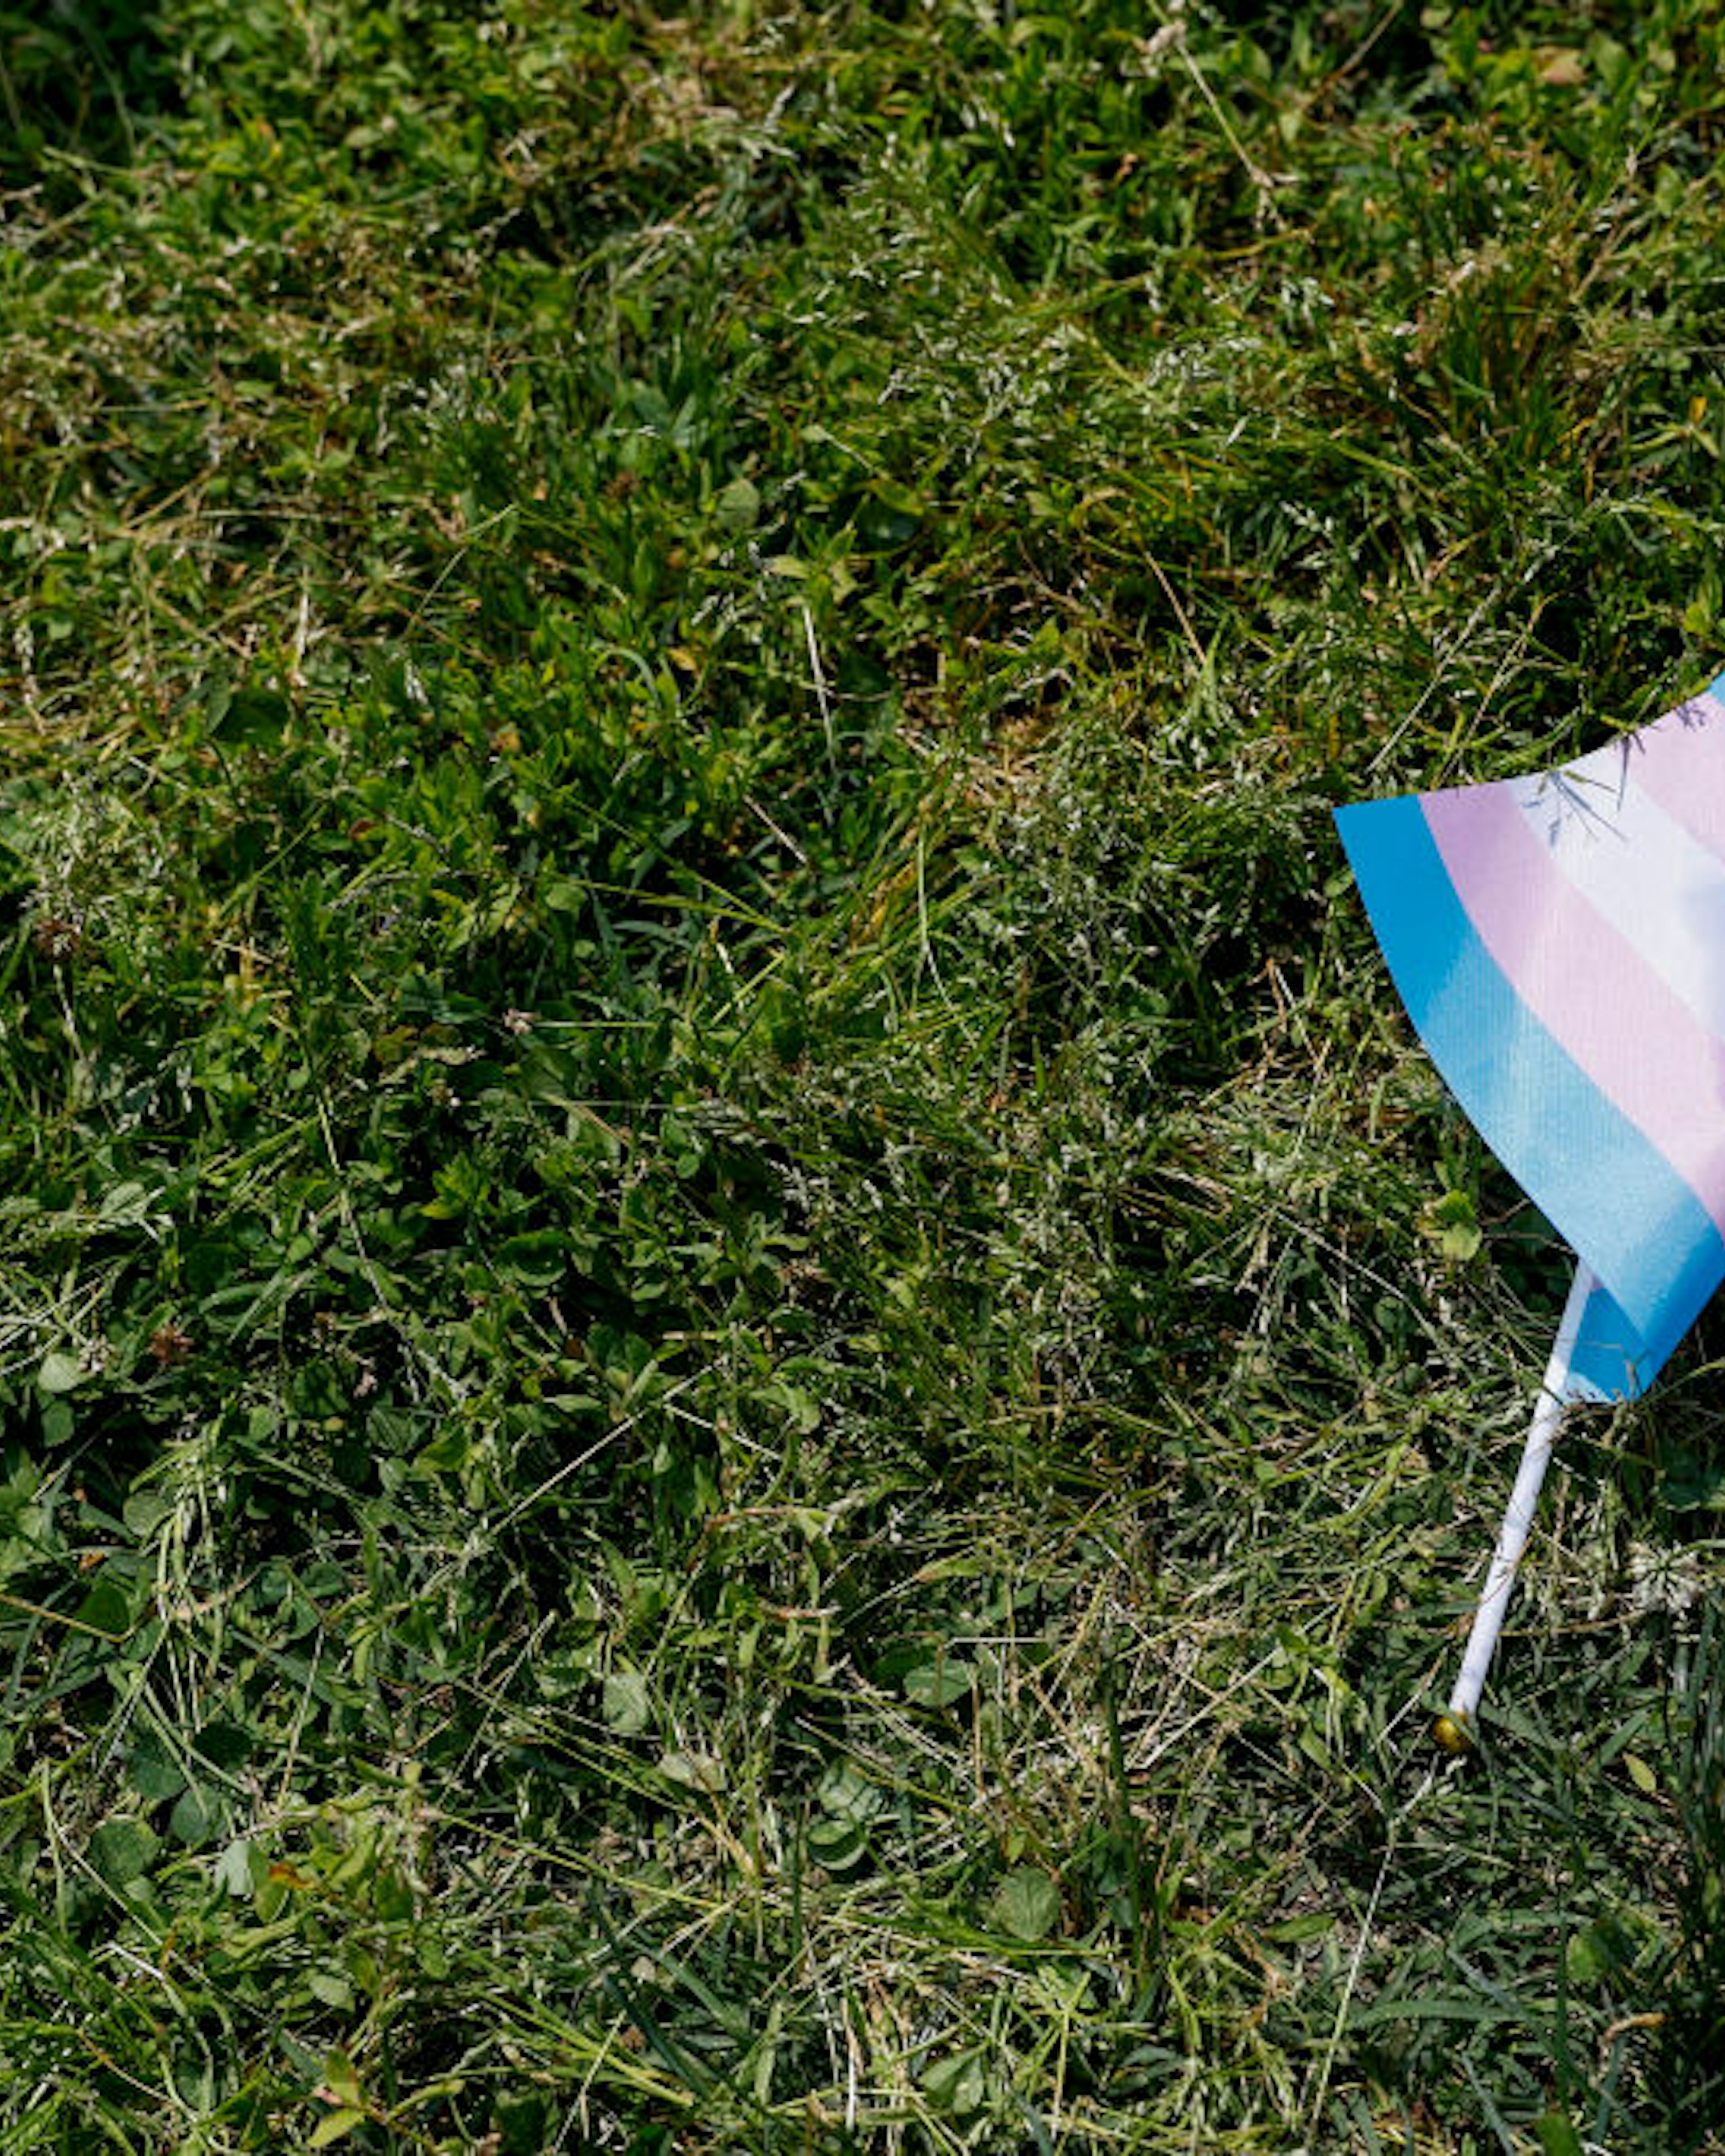 WASHINGTON, DC - MAY 22: A transgender flag sits on the grass during the "Trans Youth Prom" outside of the U.S. Capitol building on May 22, 2023 in Washington, DC. Trans and non-binary youth gathered to hold a Prom-like event that included music, dancing, and speeches. After the Prom, the kids and their families marched to the U.S. Supreme Court Building. (Photo by Anna Moneymaker/Getty Images)